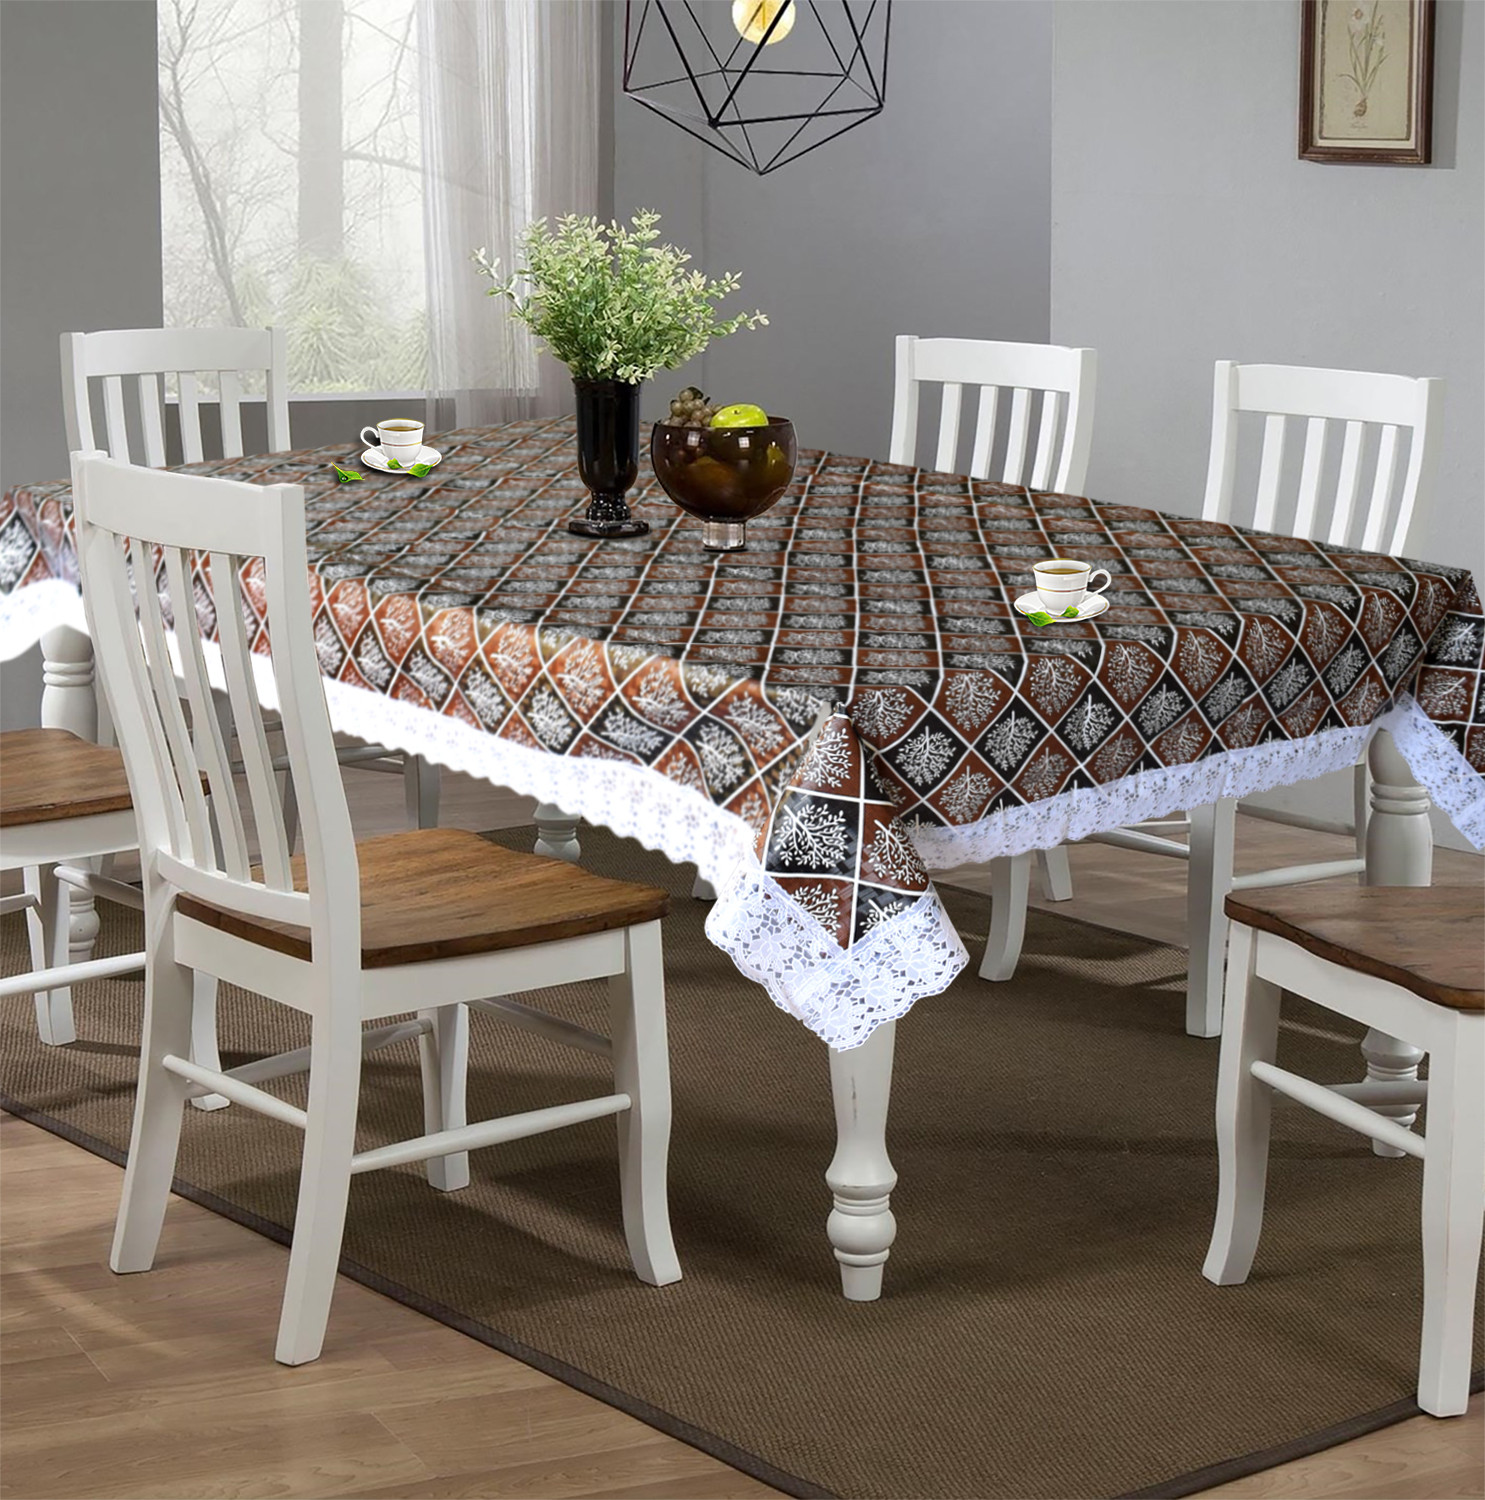 Kuber Industries Leaf Printed PVC 6 Seater Dinning Table Cover, Protector With White Lace Border, 60